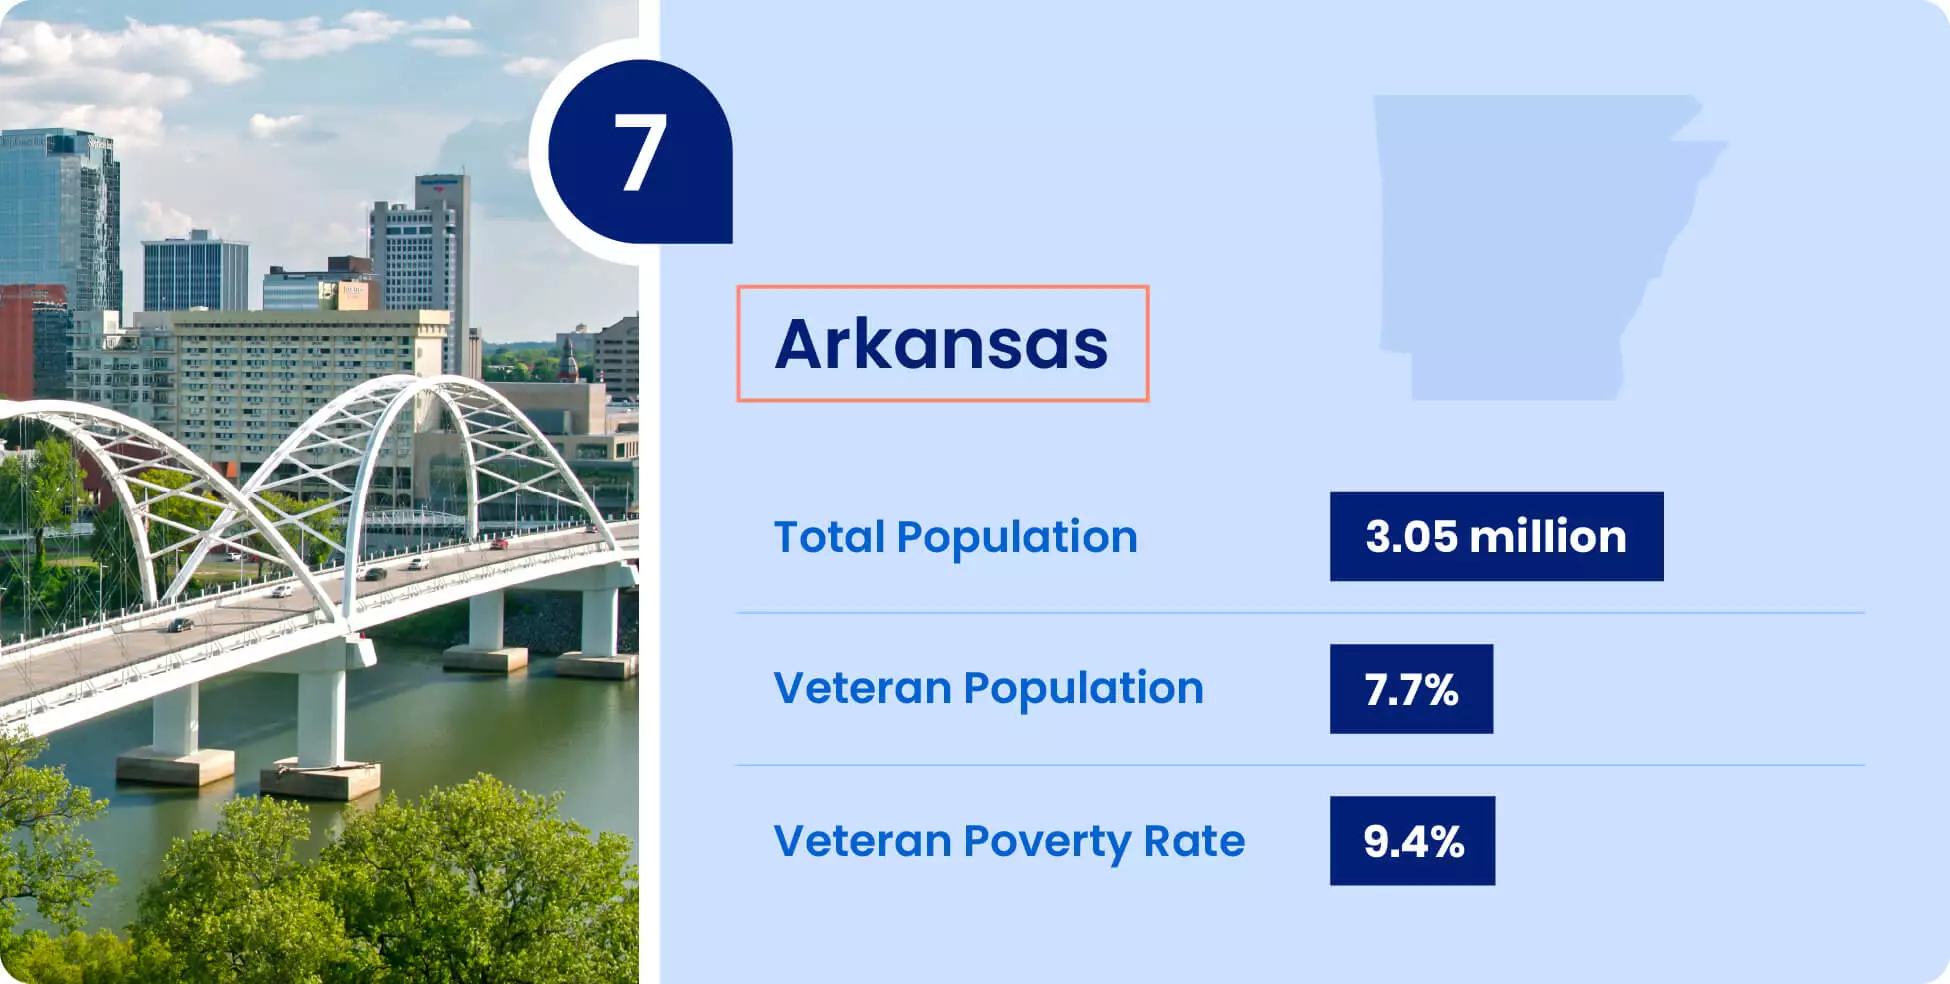 Image shows key information for military retirees thinking of moving to Arkansas.